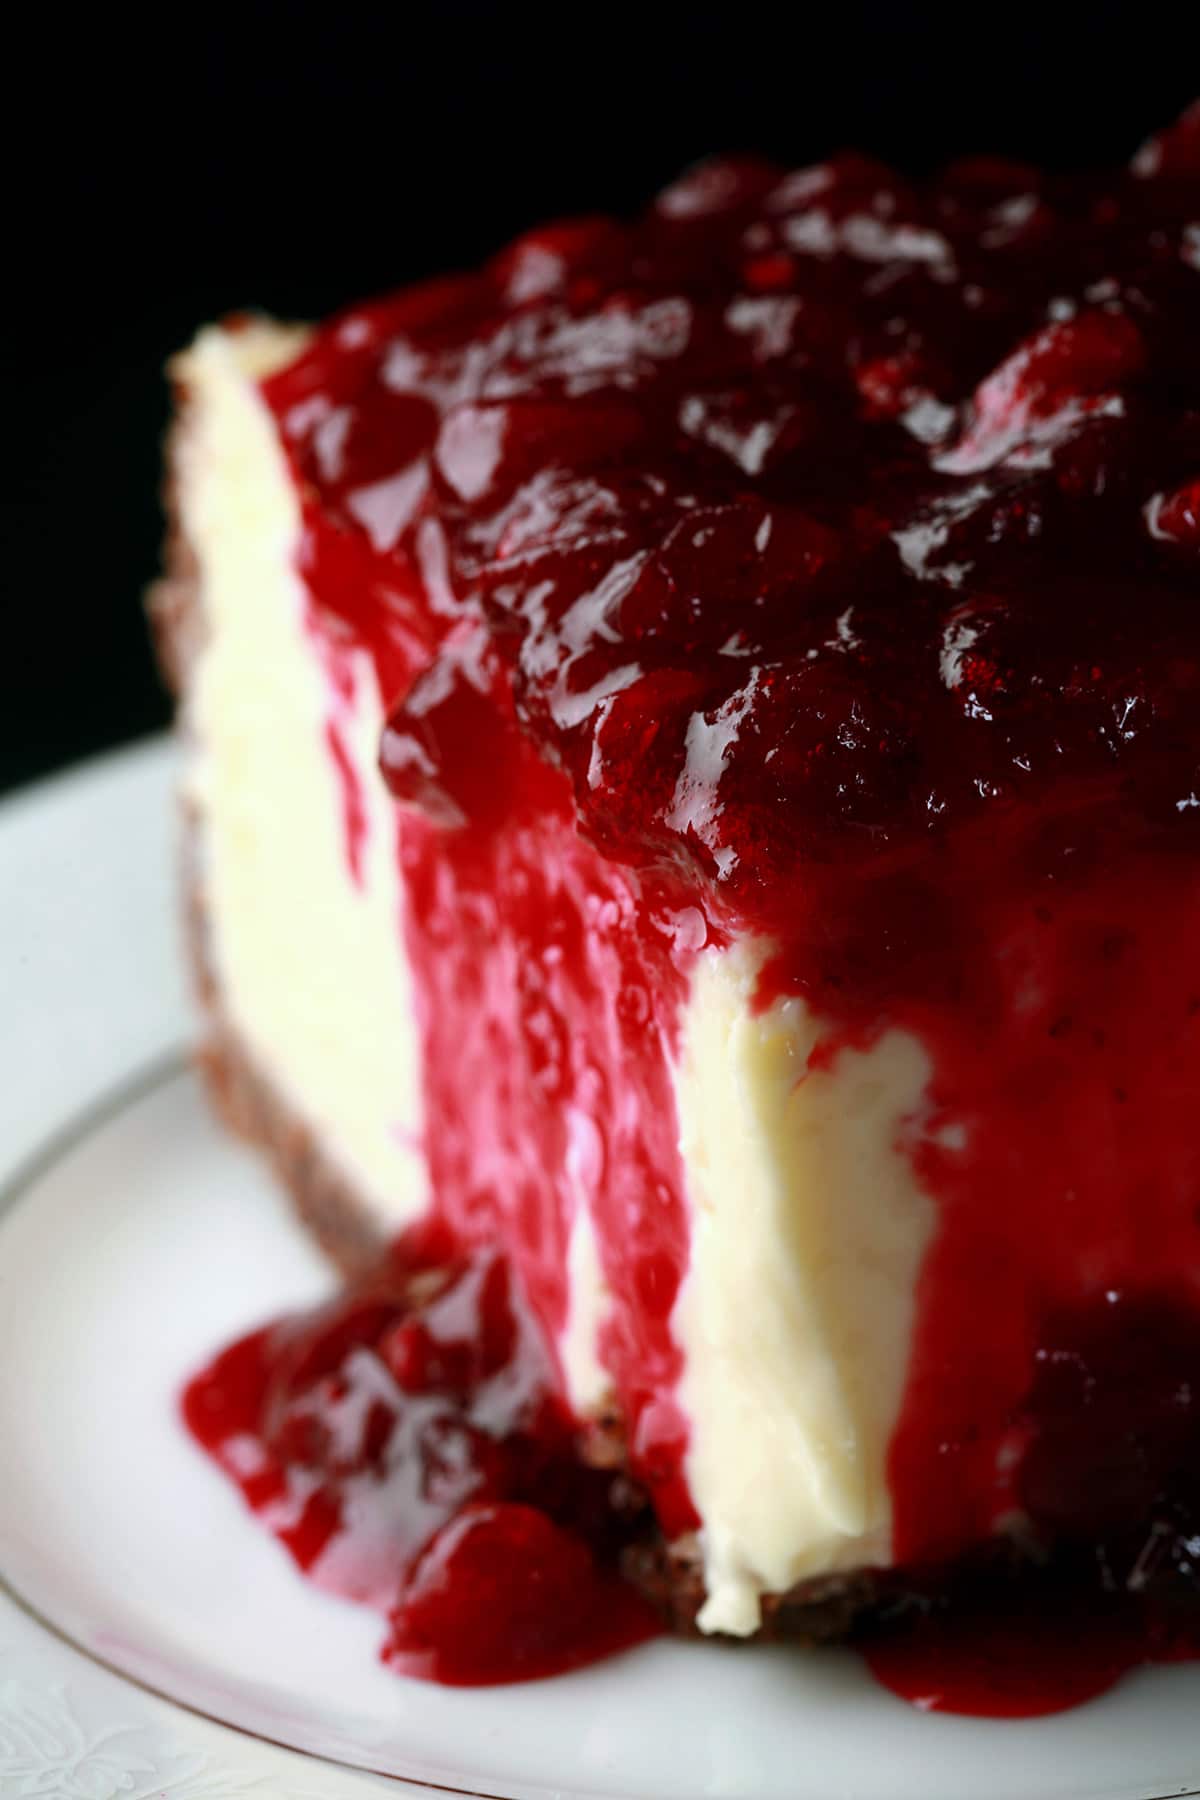 A close up view of a slice of partridgeberry cheesecake.